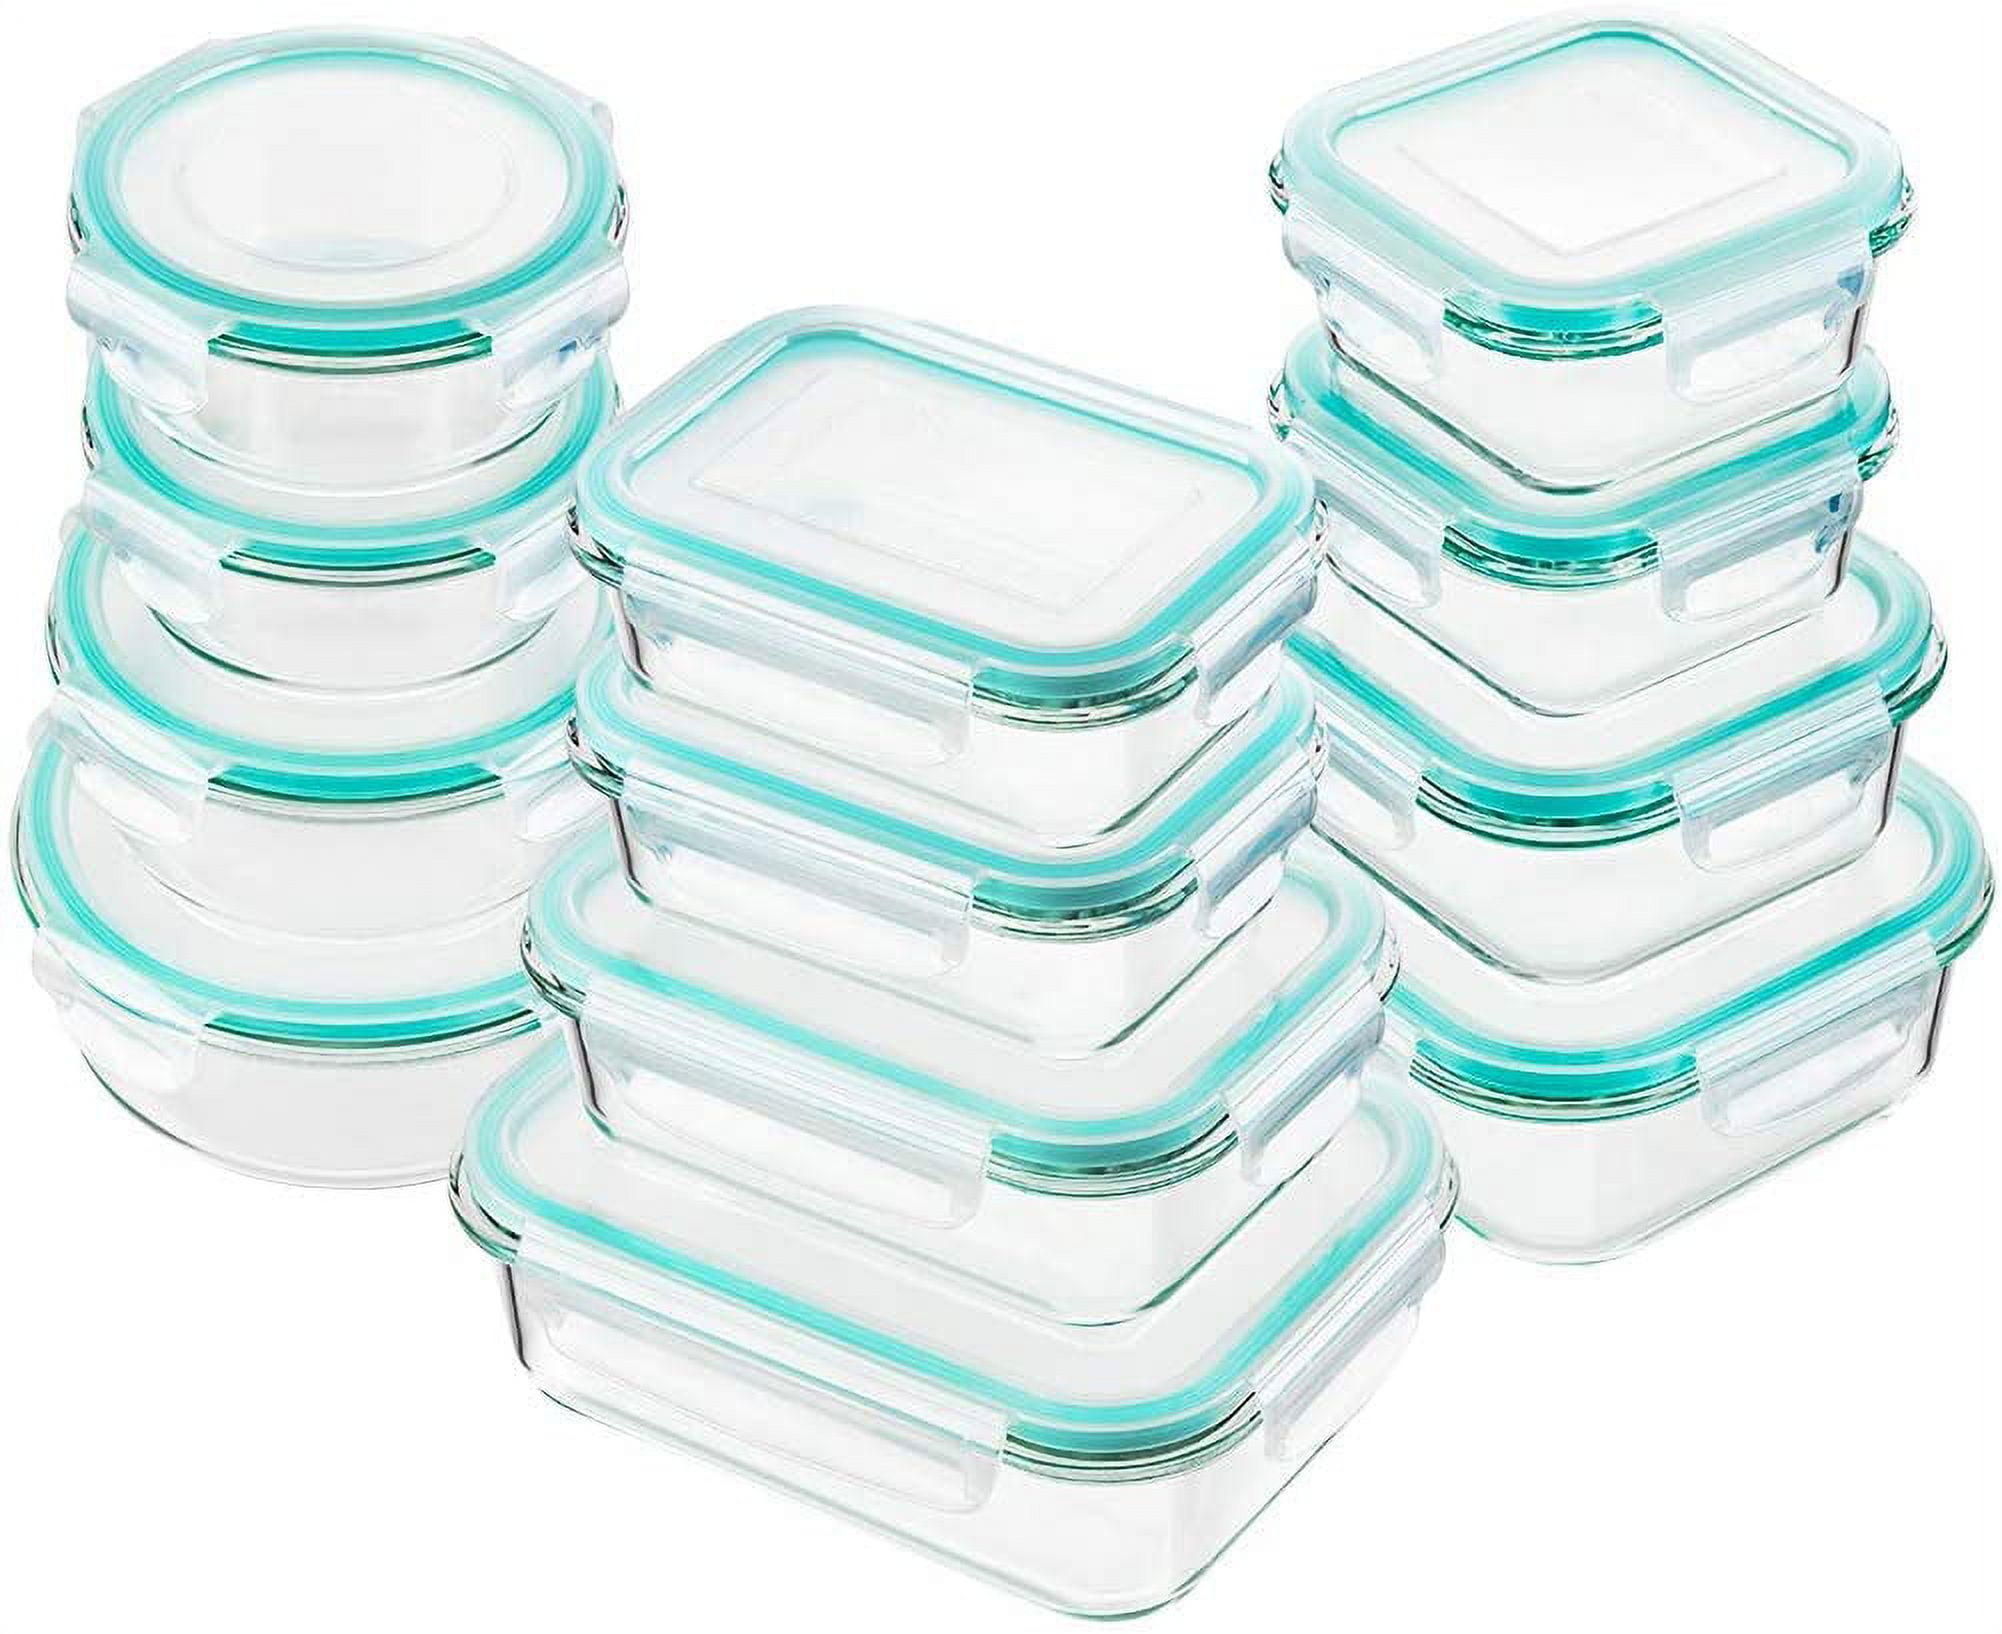 Glass Meal Prep Containers, 12-Piece, Food Storage Containers with Lids